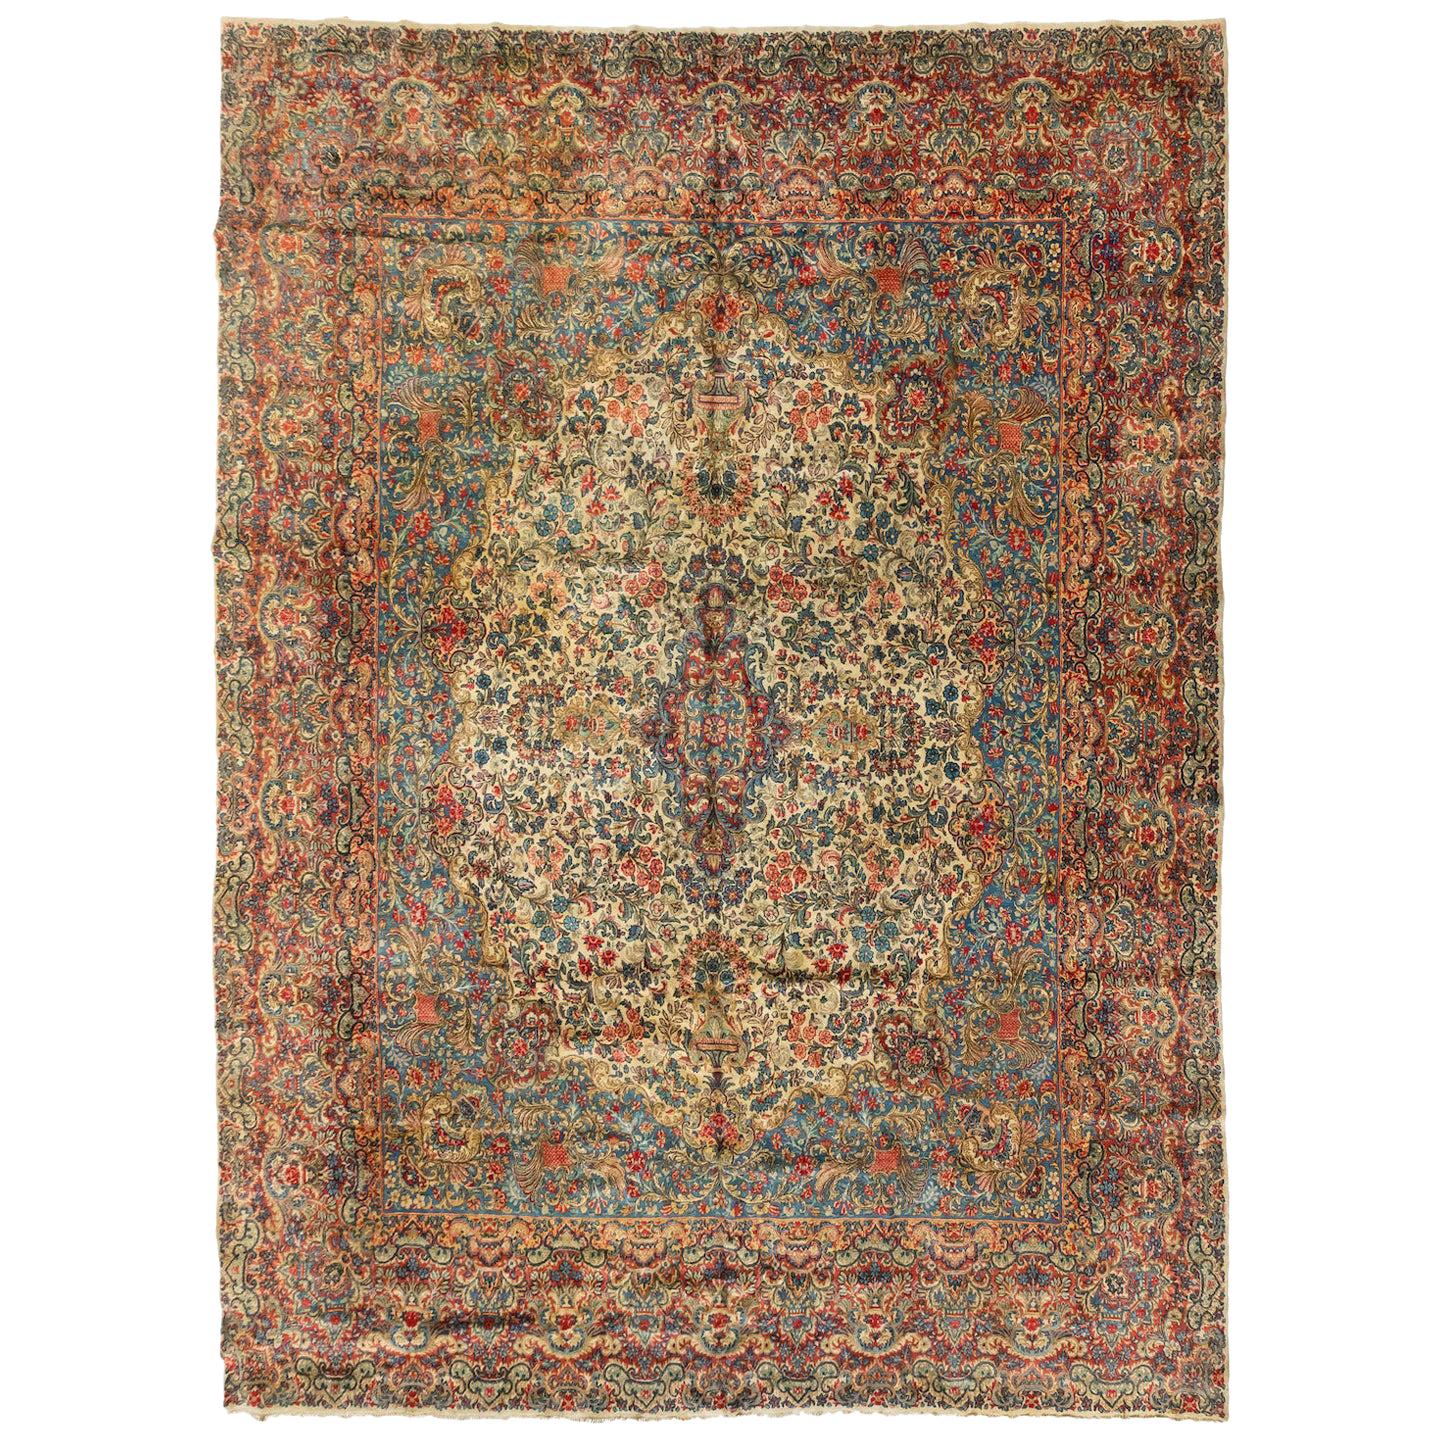 Oversize Antique Persian Ivory and Blue Floral Kirman Rug, circa 1920s For Sale